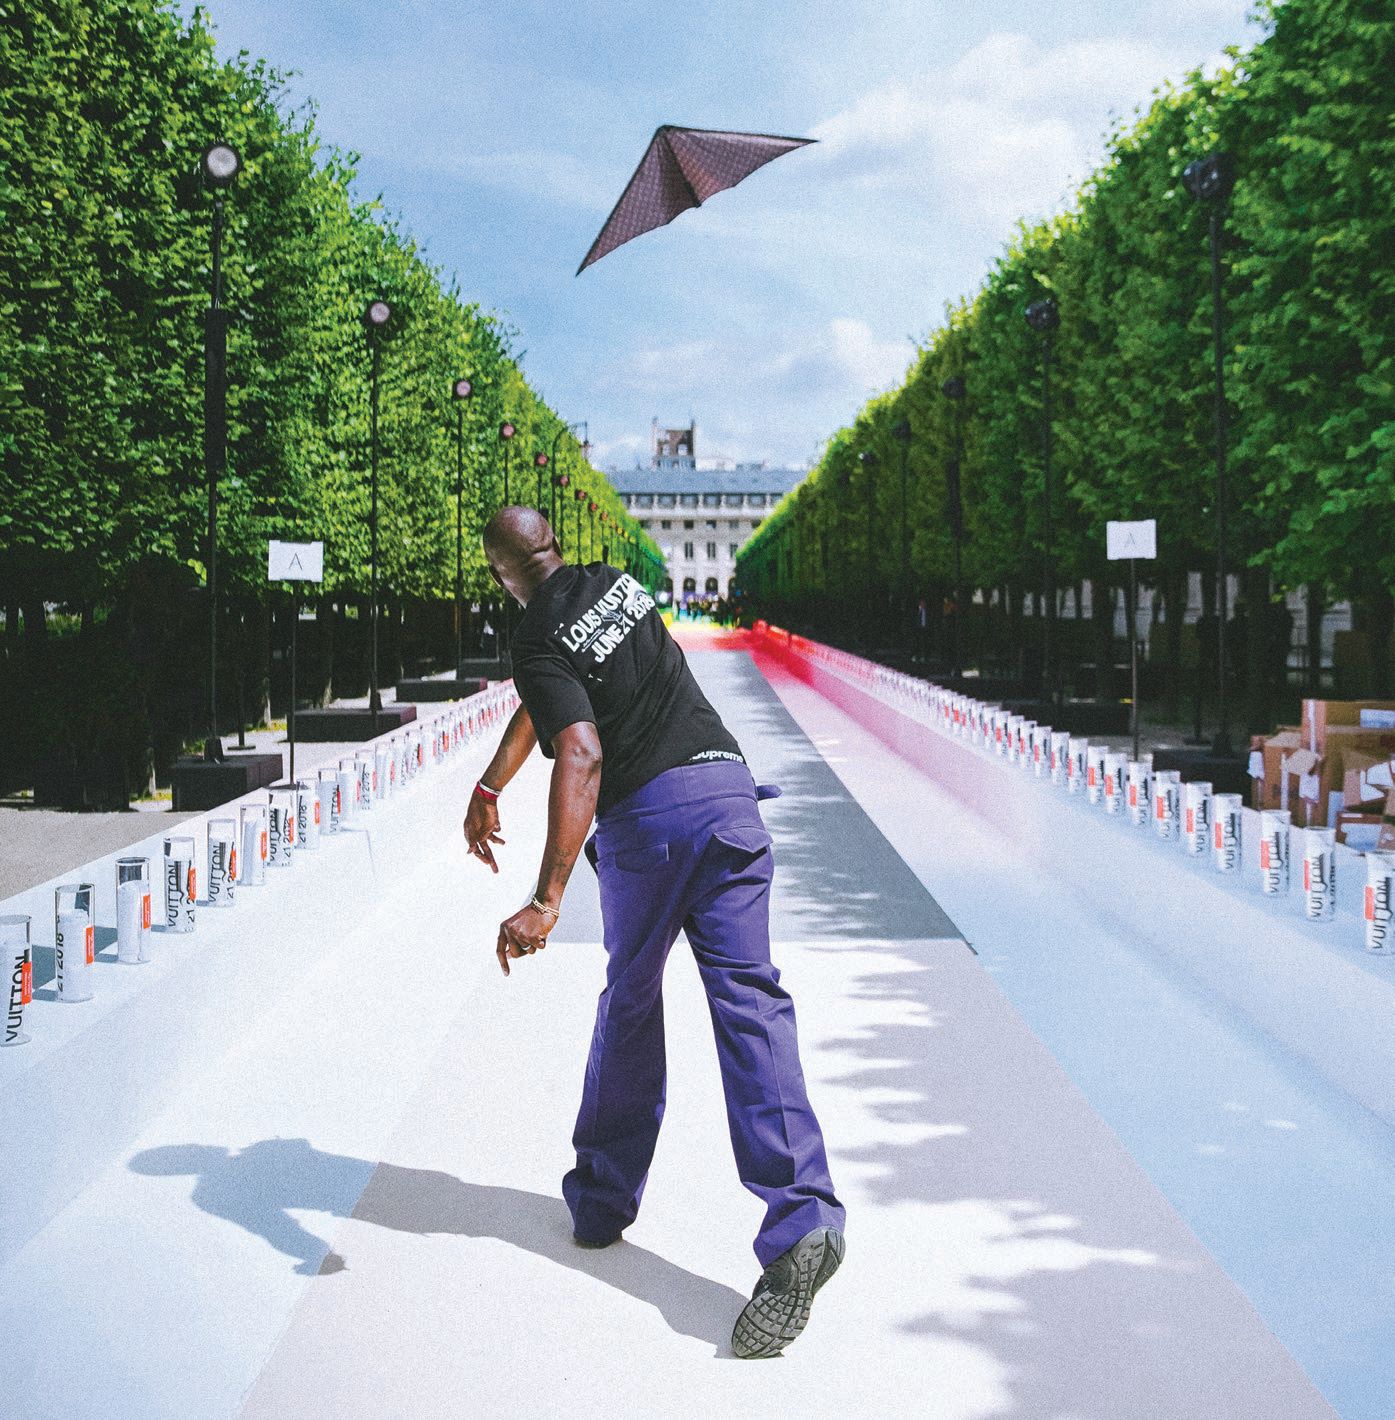 The designer launches a paper plane on the runway at his Louis Vuitton spring/summer 2019 show in Paris’ Palais-Royal garden. PHOTO: BY BOGDAN “CHILLDAYS” PLAKOV/COURTESY OF ASSOULINE